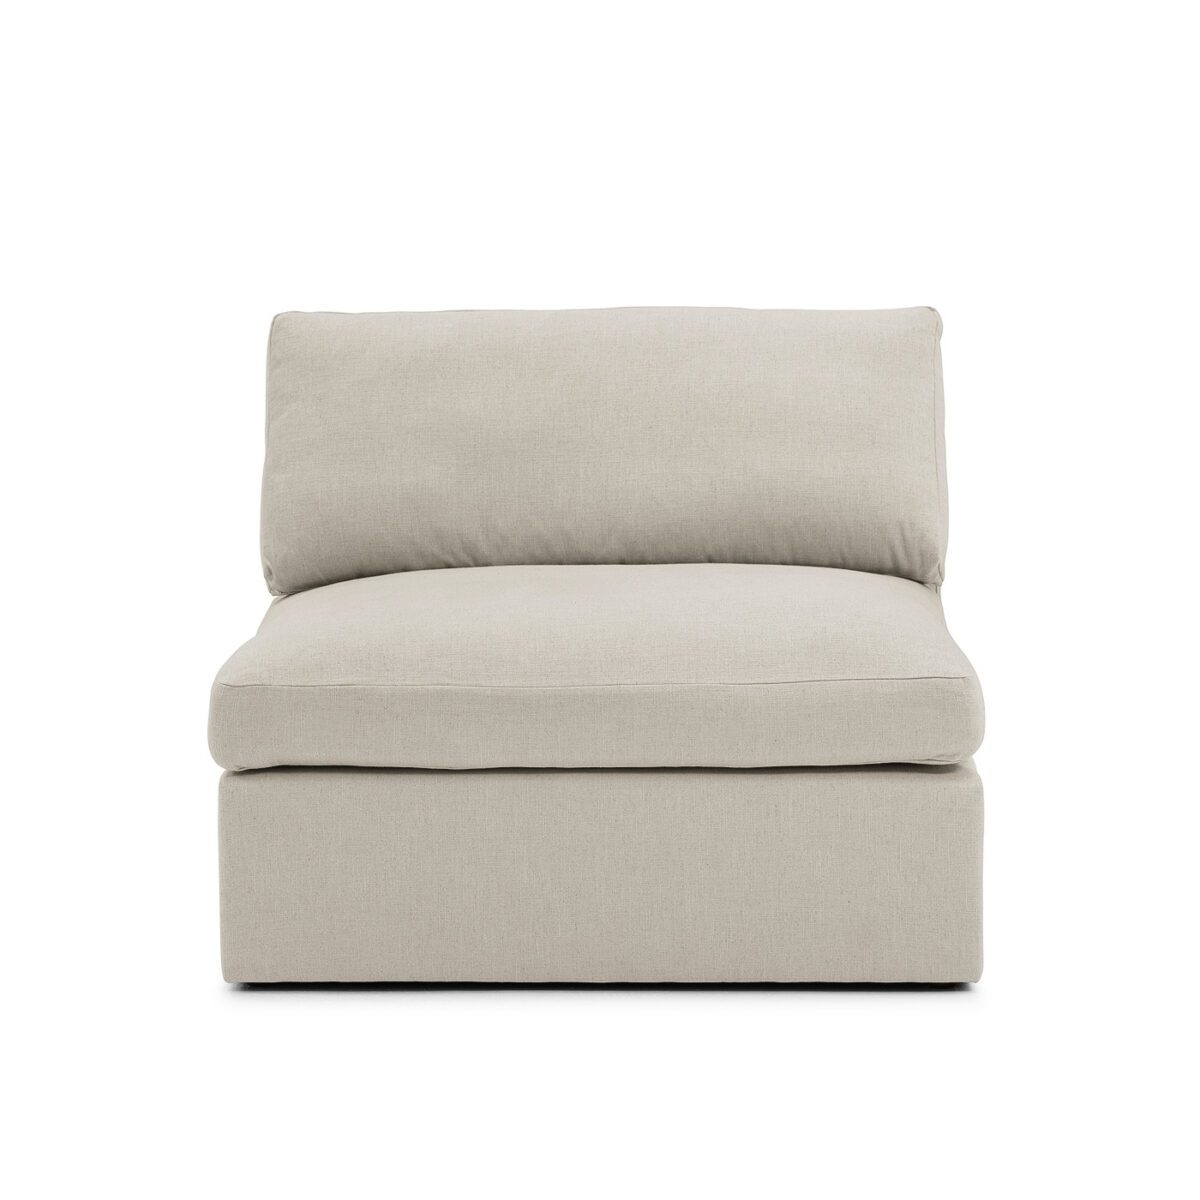 Lucie Grande 3-Seat Sofa (Without Armrests) Creme